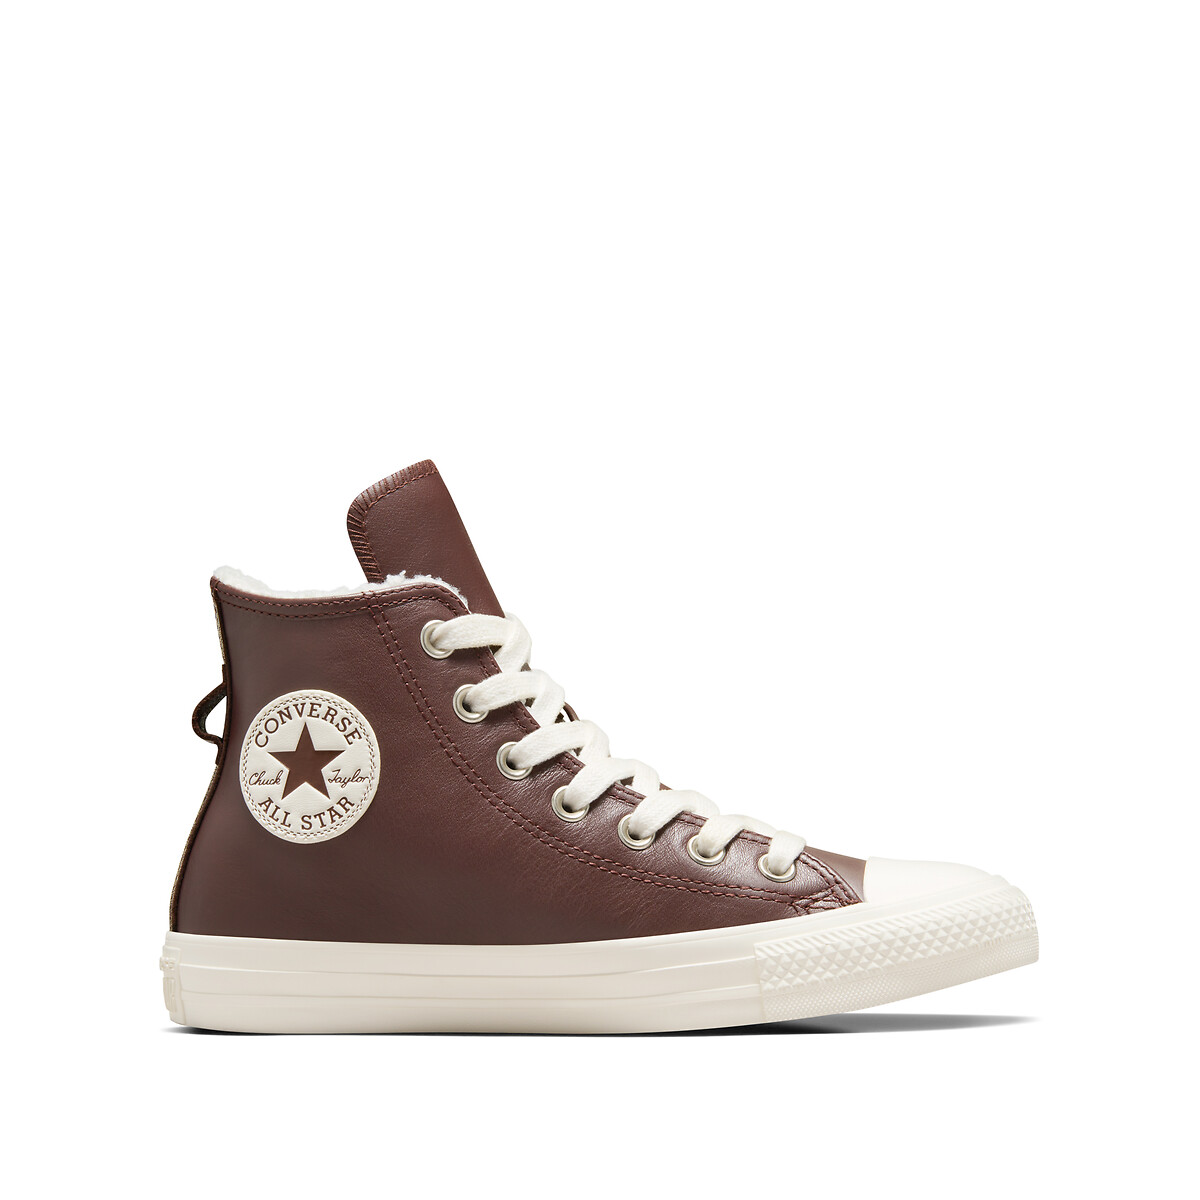 Converse Sneakers Chuck Taylor All Star Hi Warm Weather Marrone Donna Taglie 38